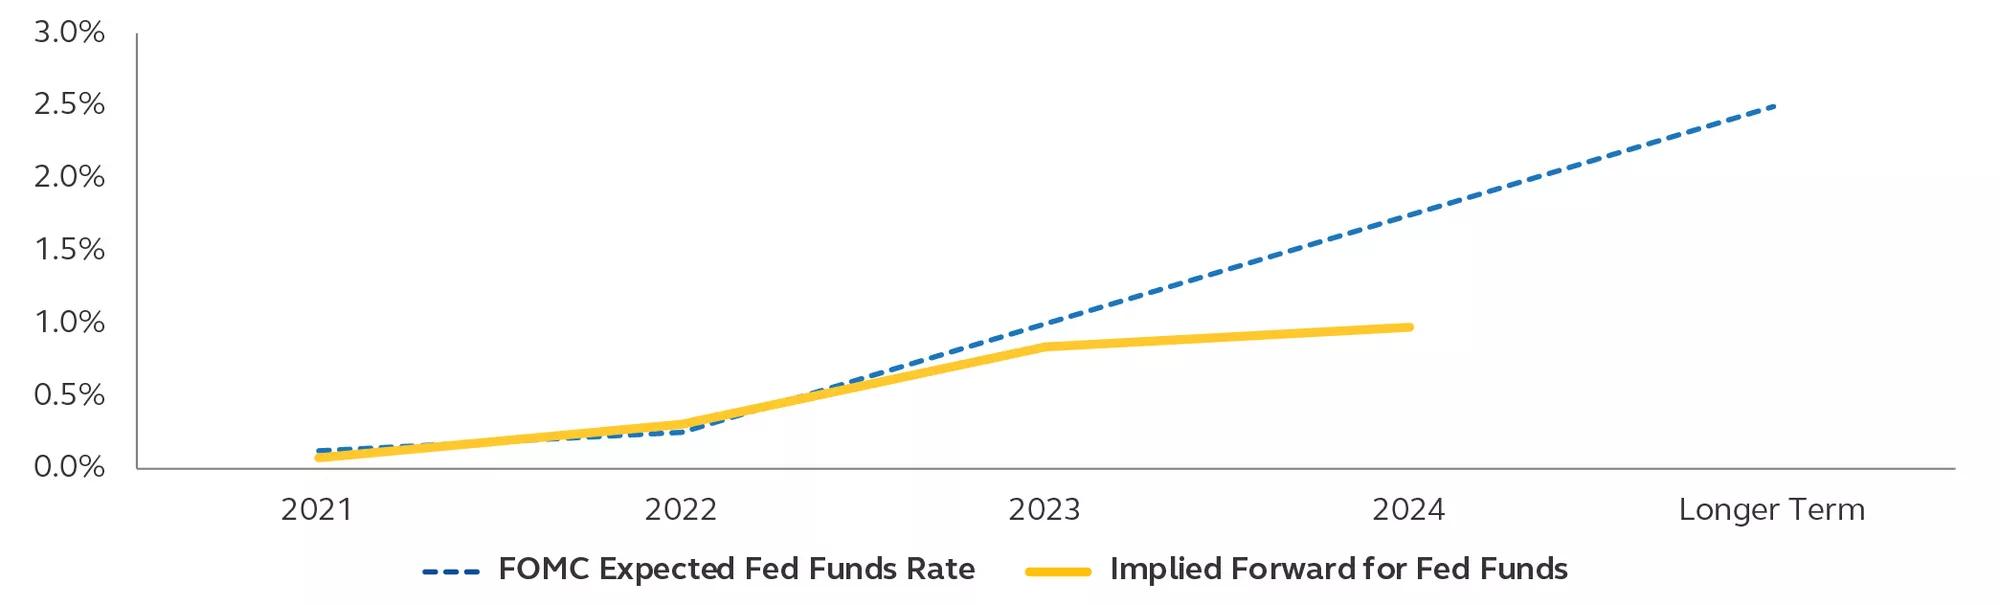 Bar graph showing FOMC expected FED funds vs. forward fed funds